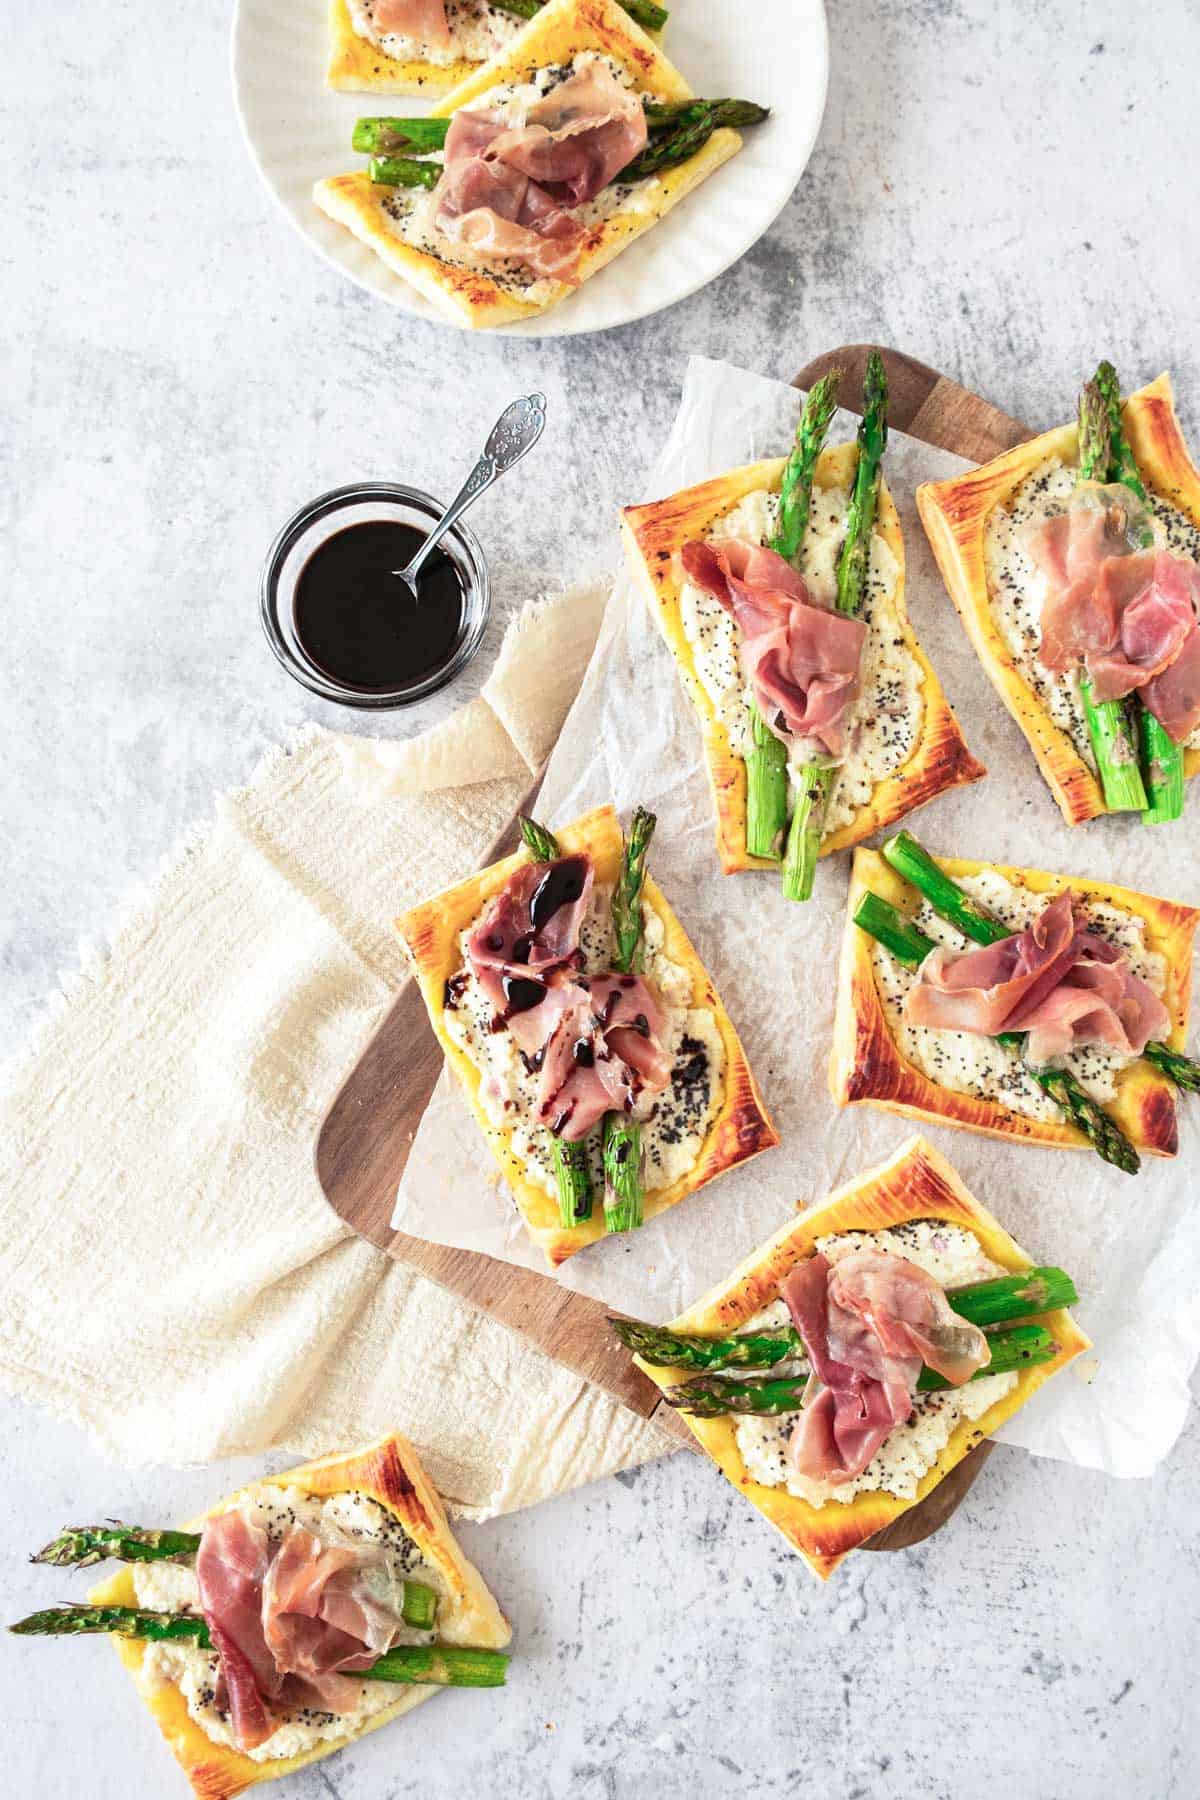 Ricotta, Asparagus and prosciutto tartlets served with balsamic glaze.